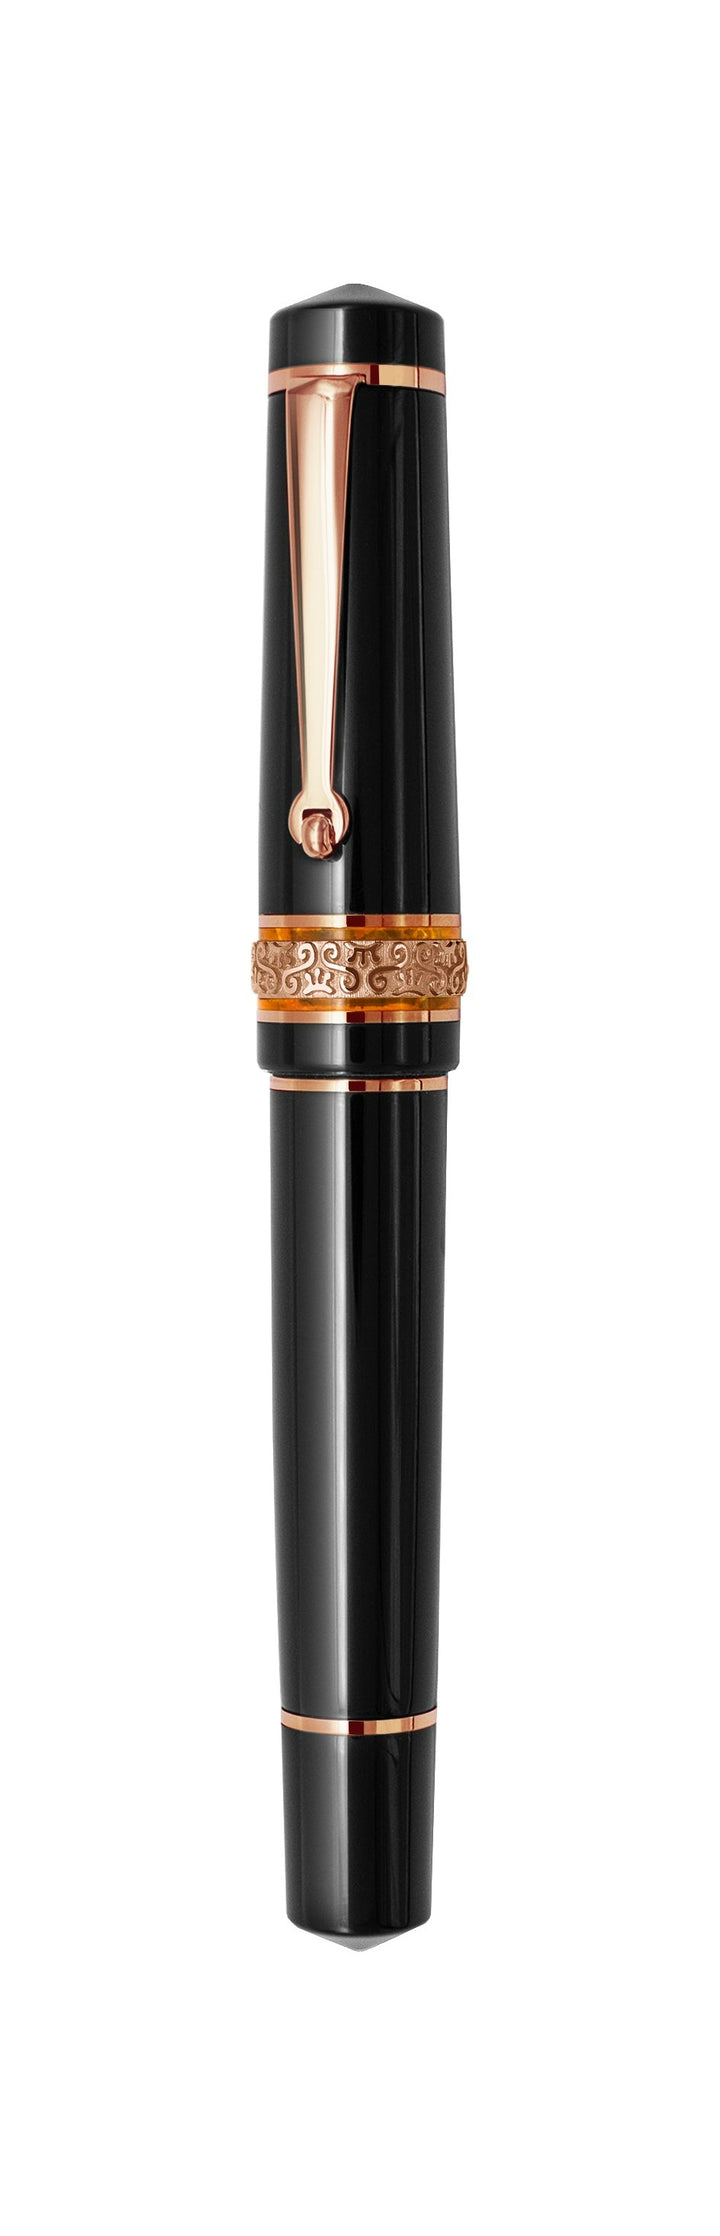 Maiora Alpha K Nera Rose Gold Fountain Pen with ink window